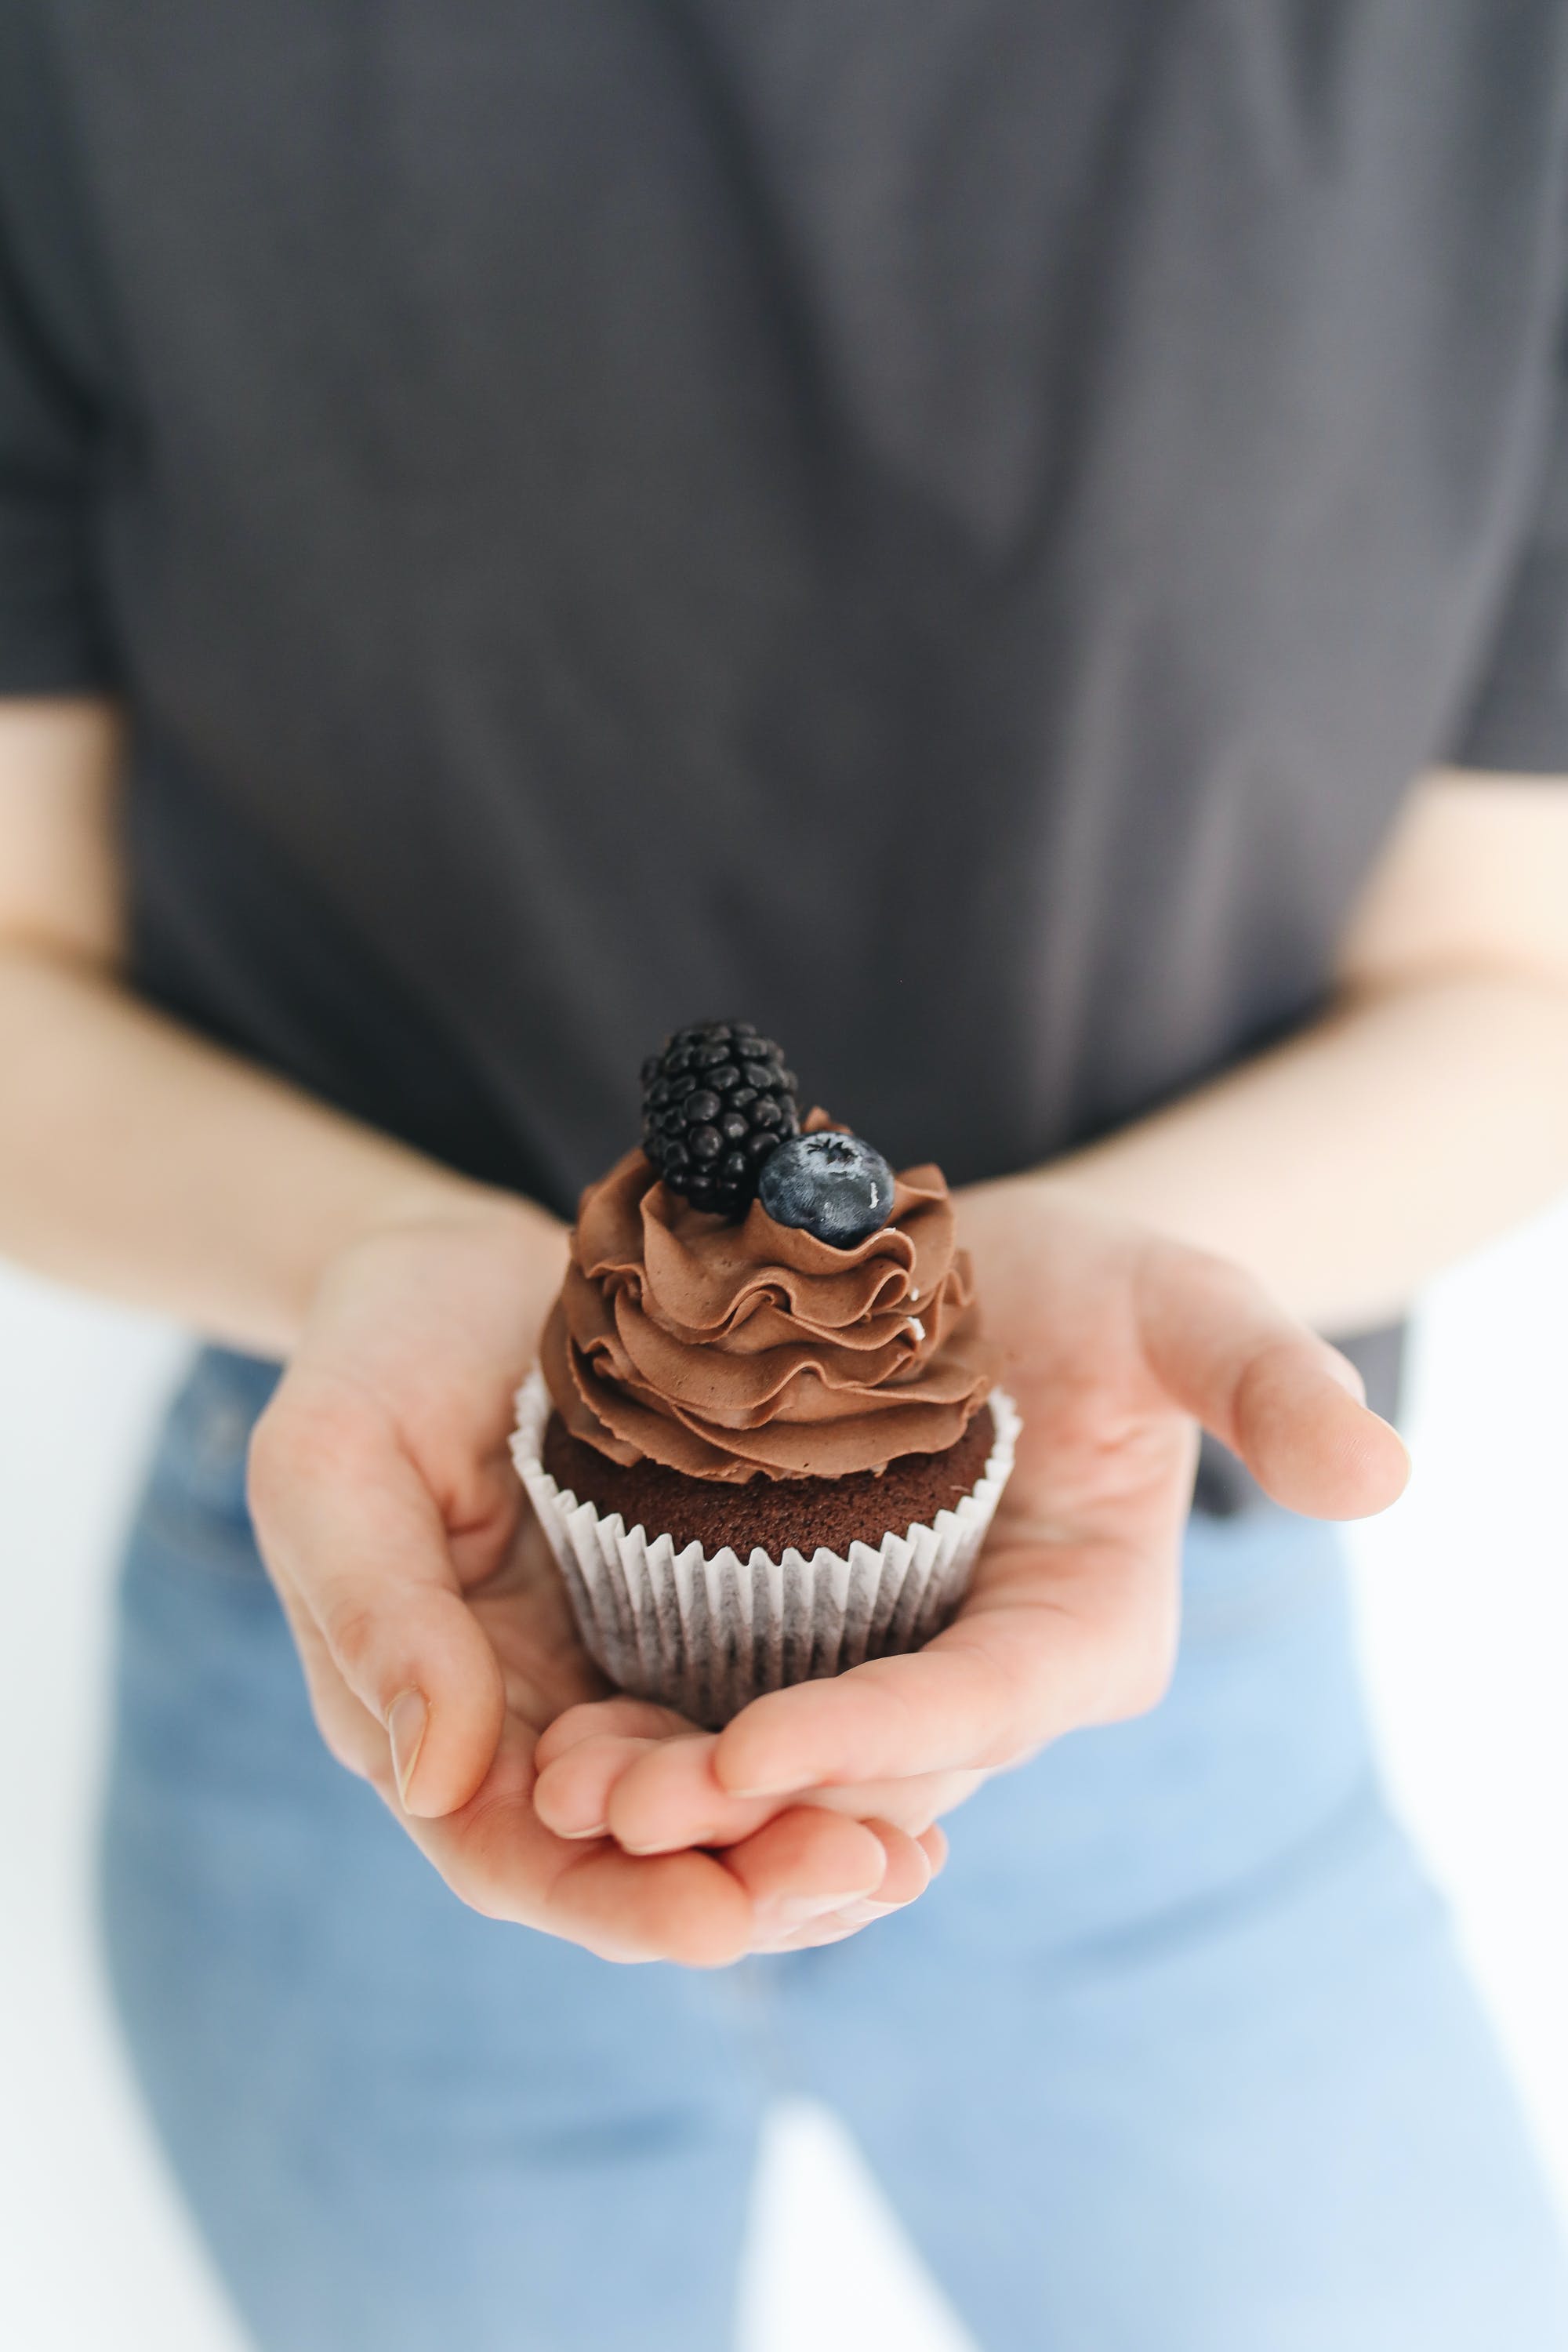 A person holding a chocolate cupcake. | Source: Pexels